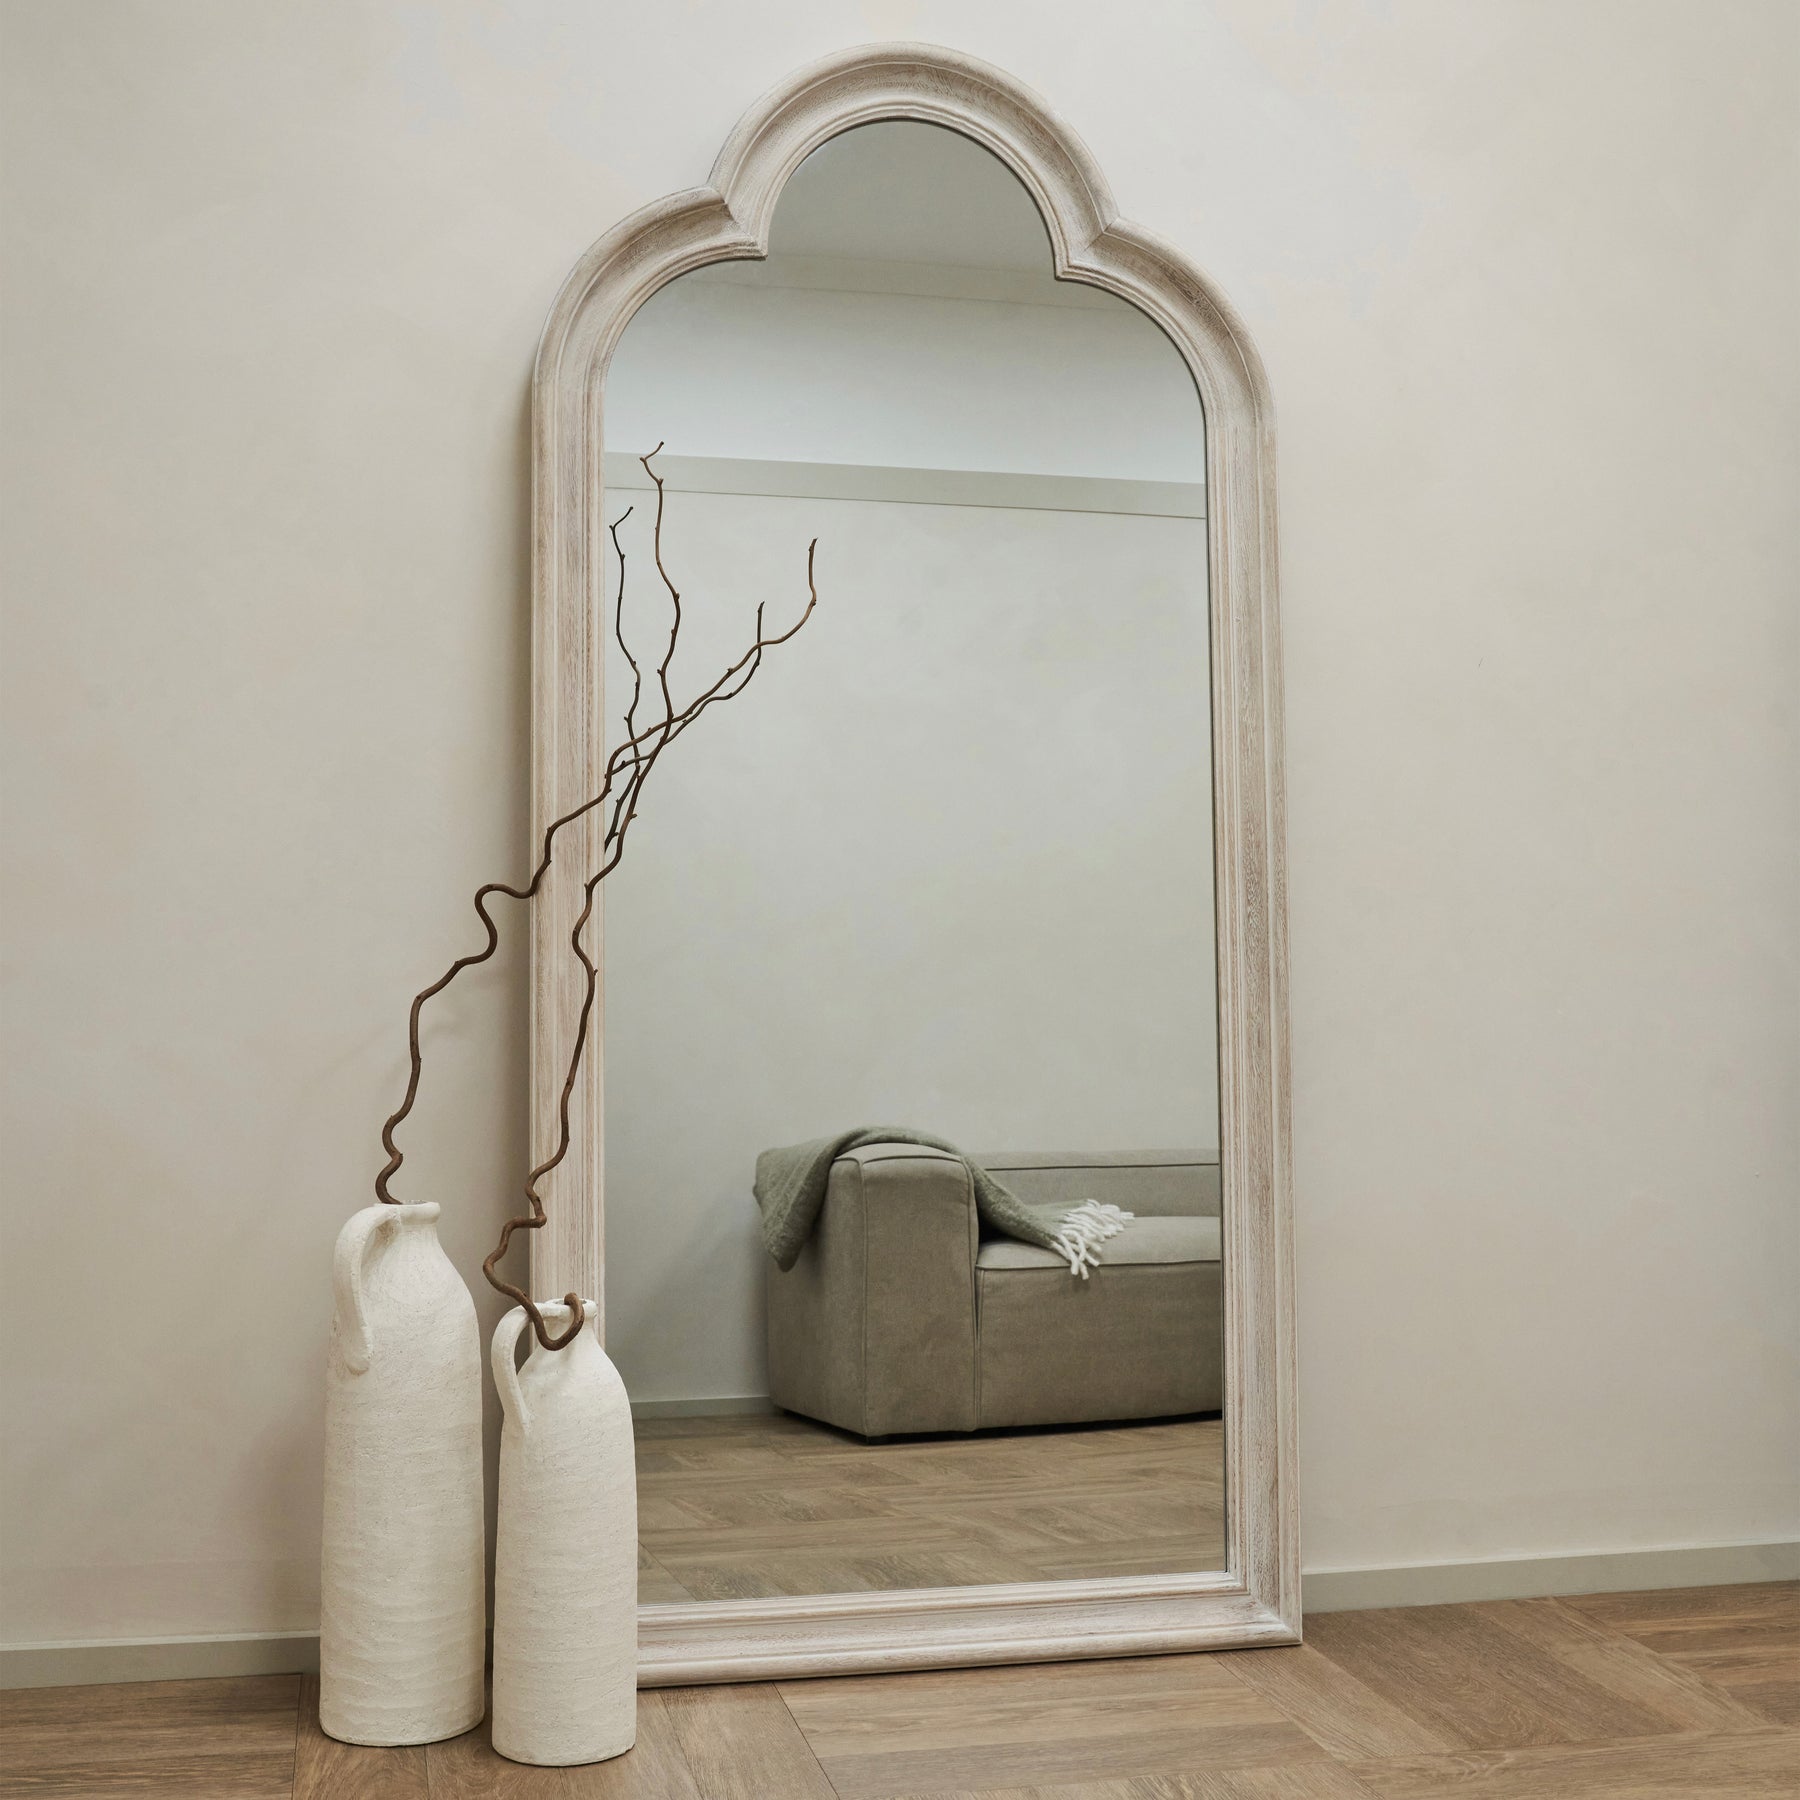 Melilla - White Washed Wood Arched Full Length Mirror 170cm x 80cm